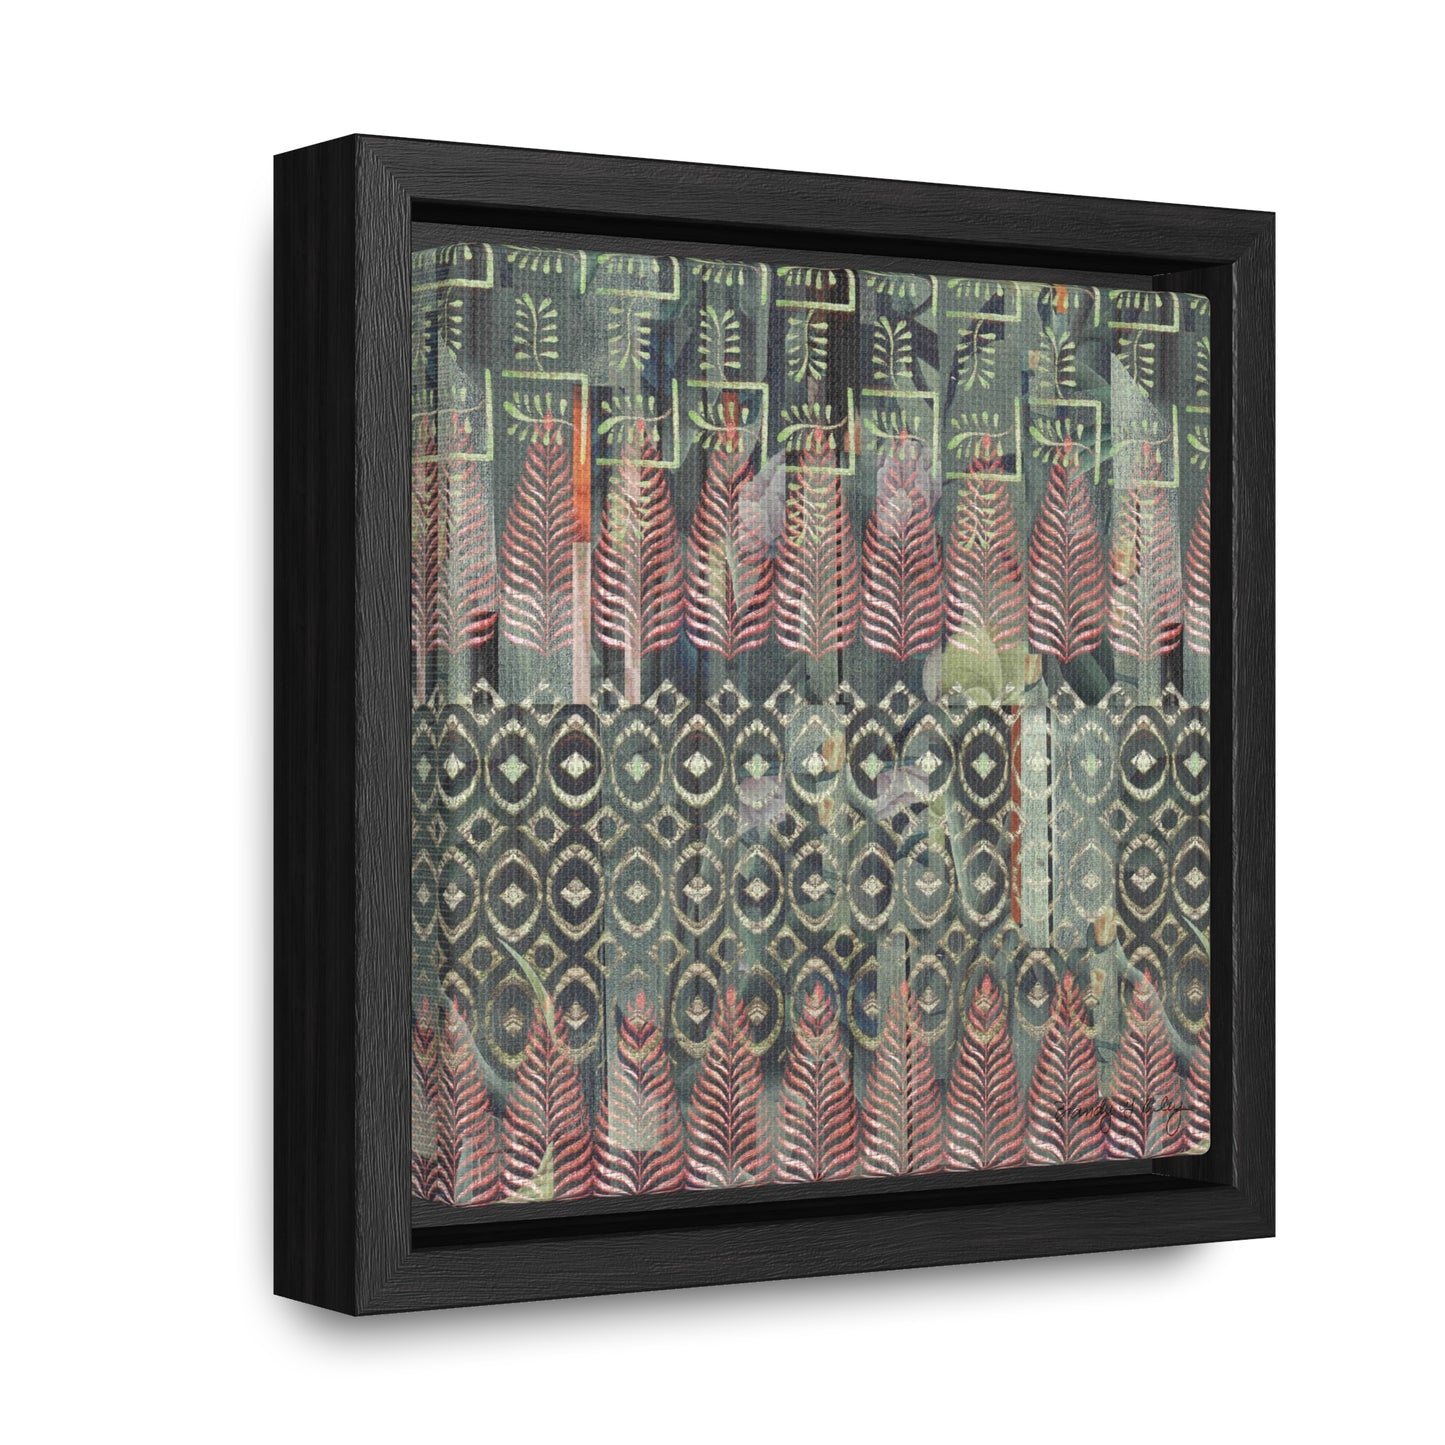 Mini framed canvas print featuring a green and red wood block and collage pattern